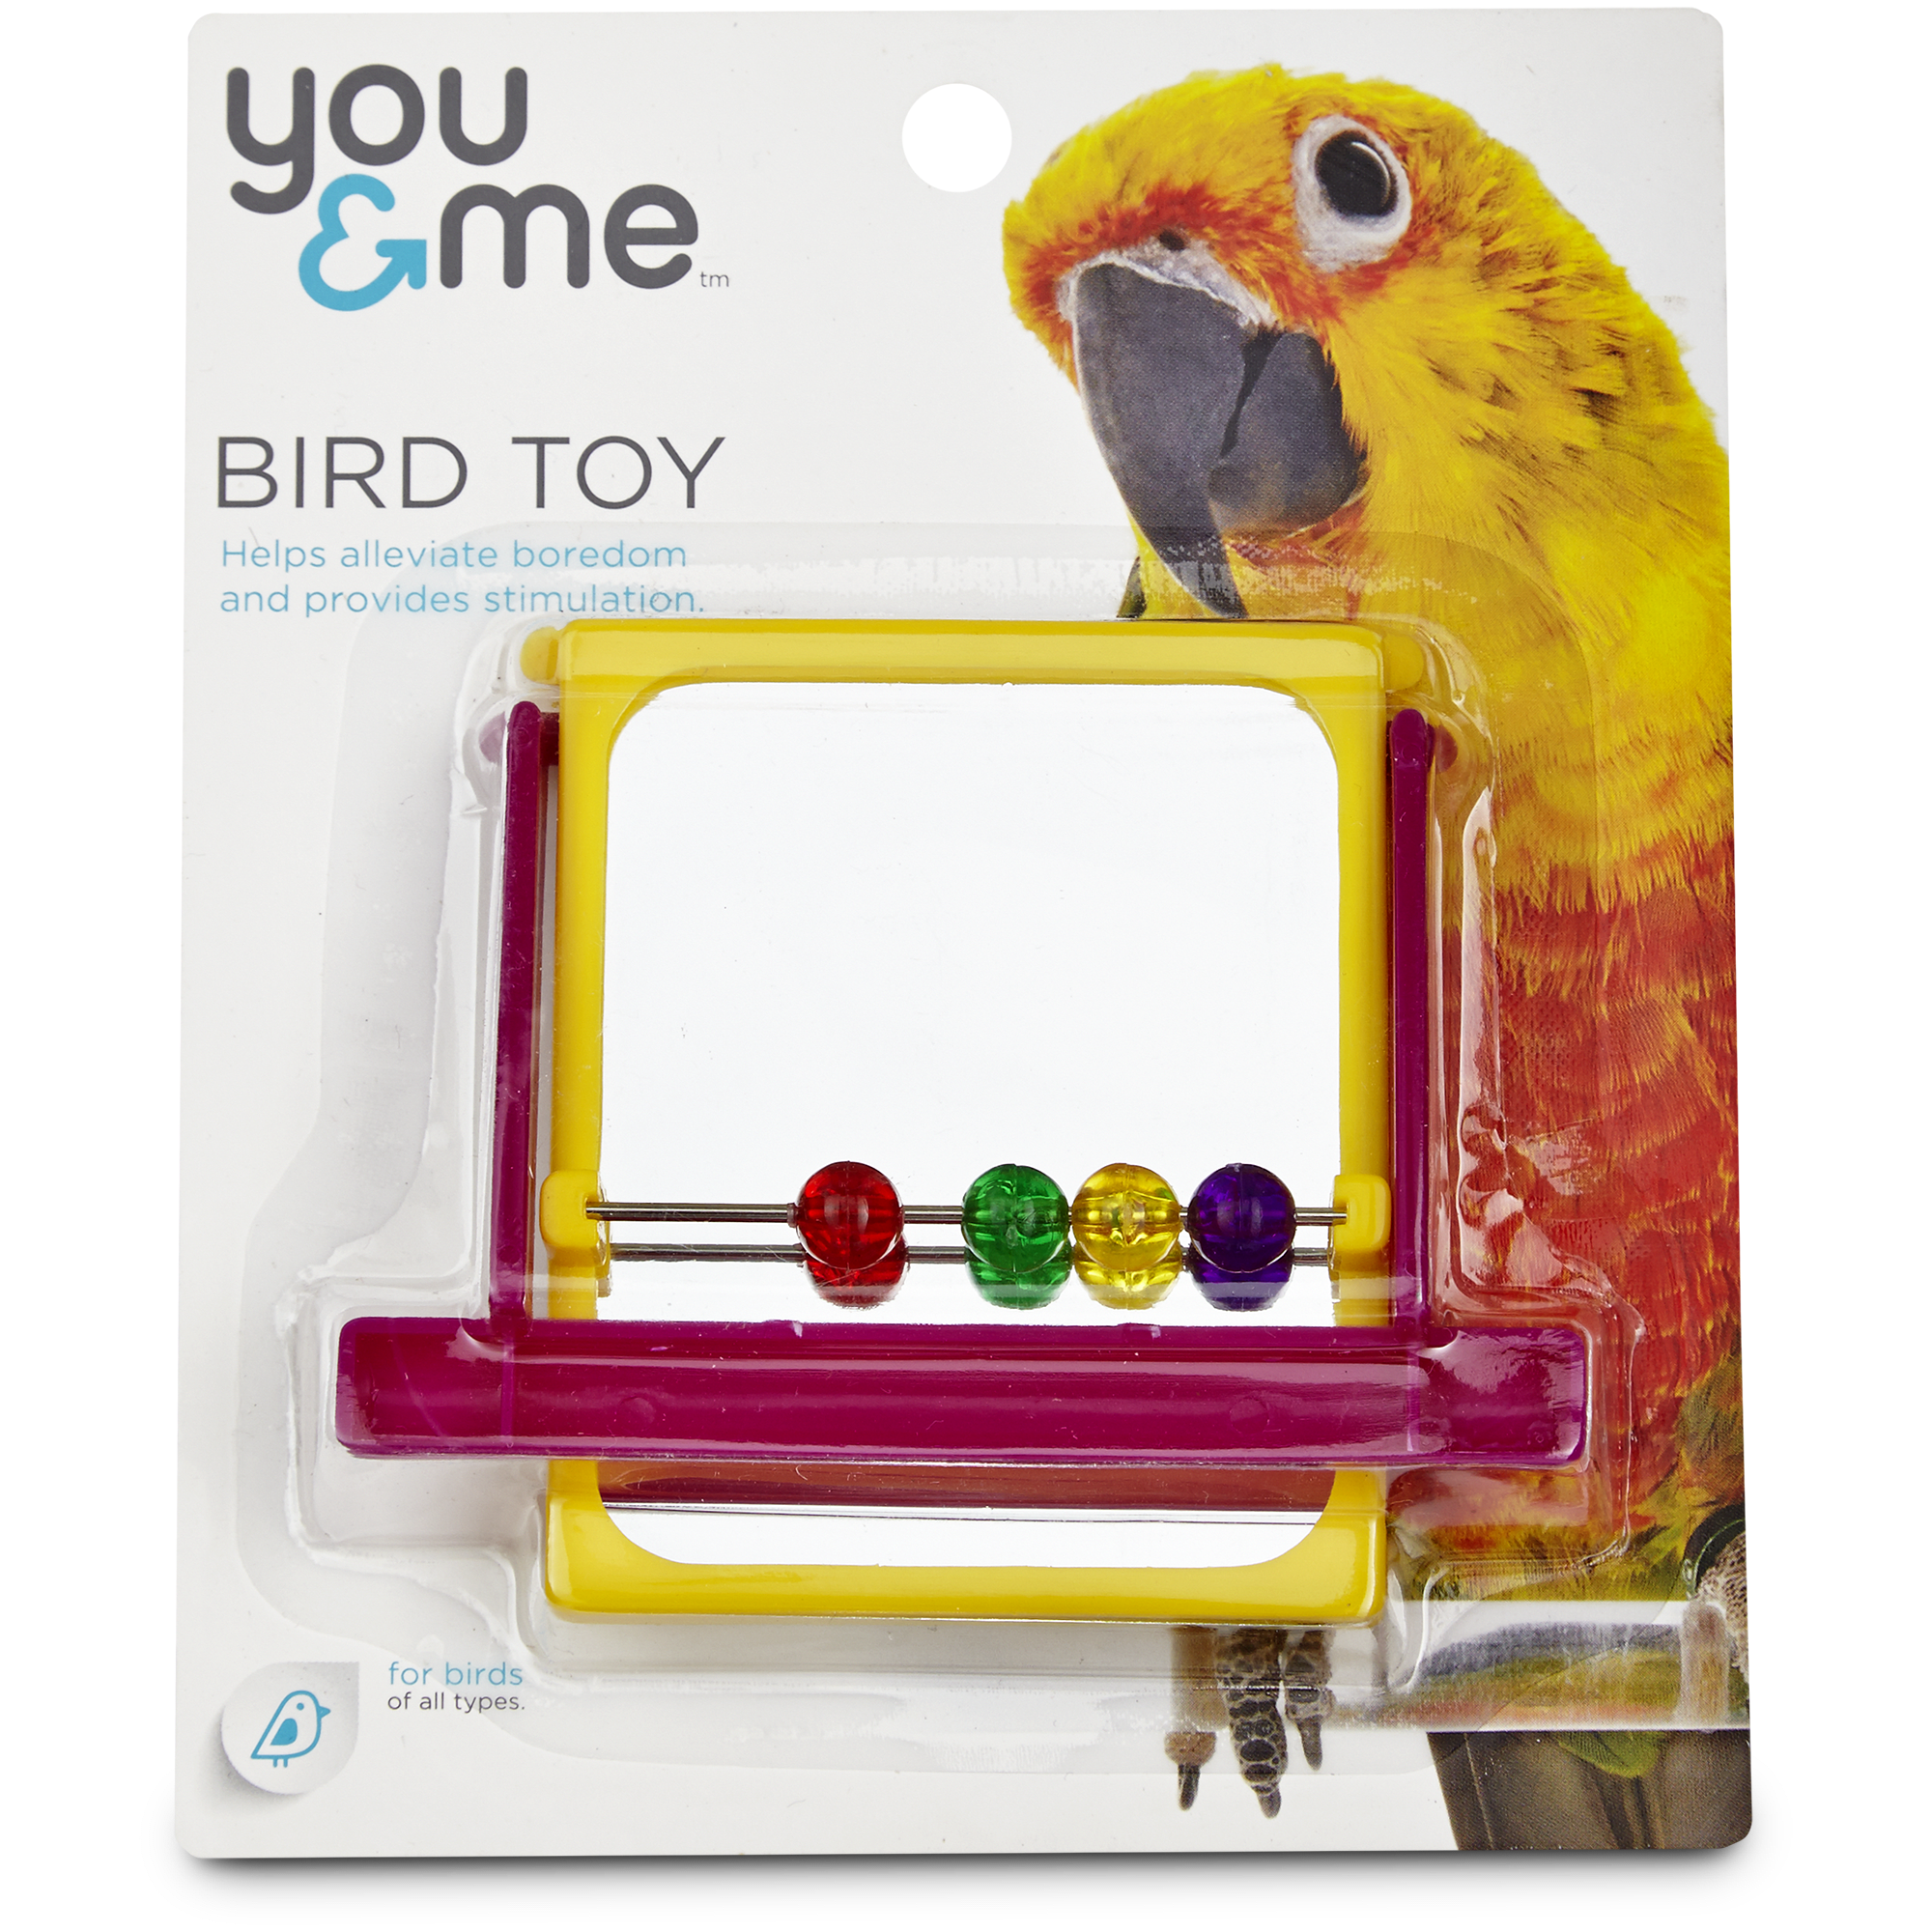 Autone Funny Mini Bird Mirror Toys with Bell Stand Mirror Parrots Hanging Play Toys,1PC Color Random